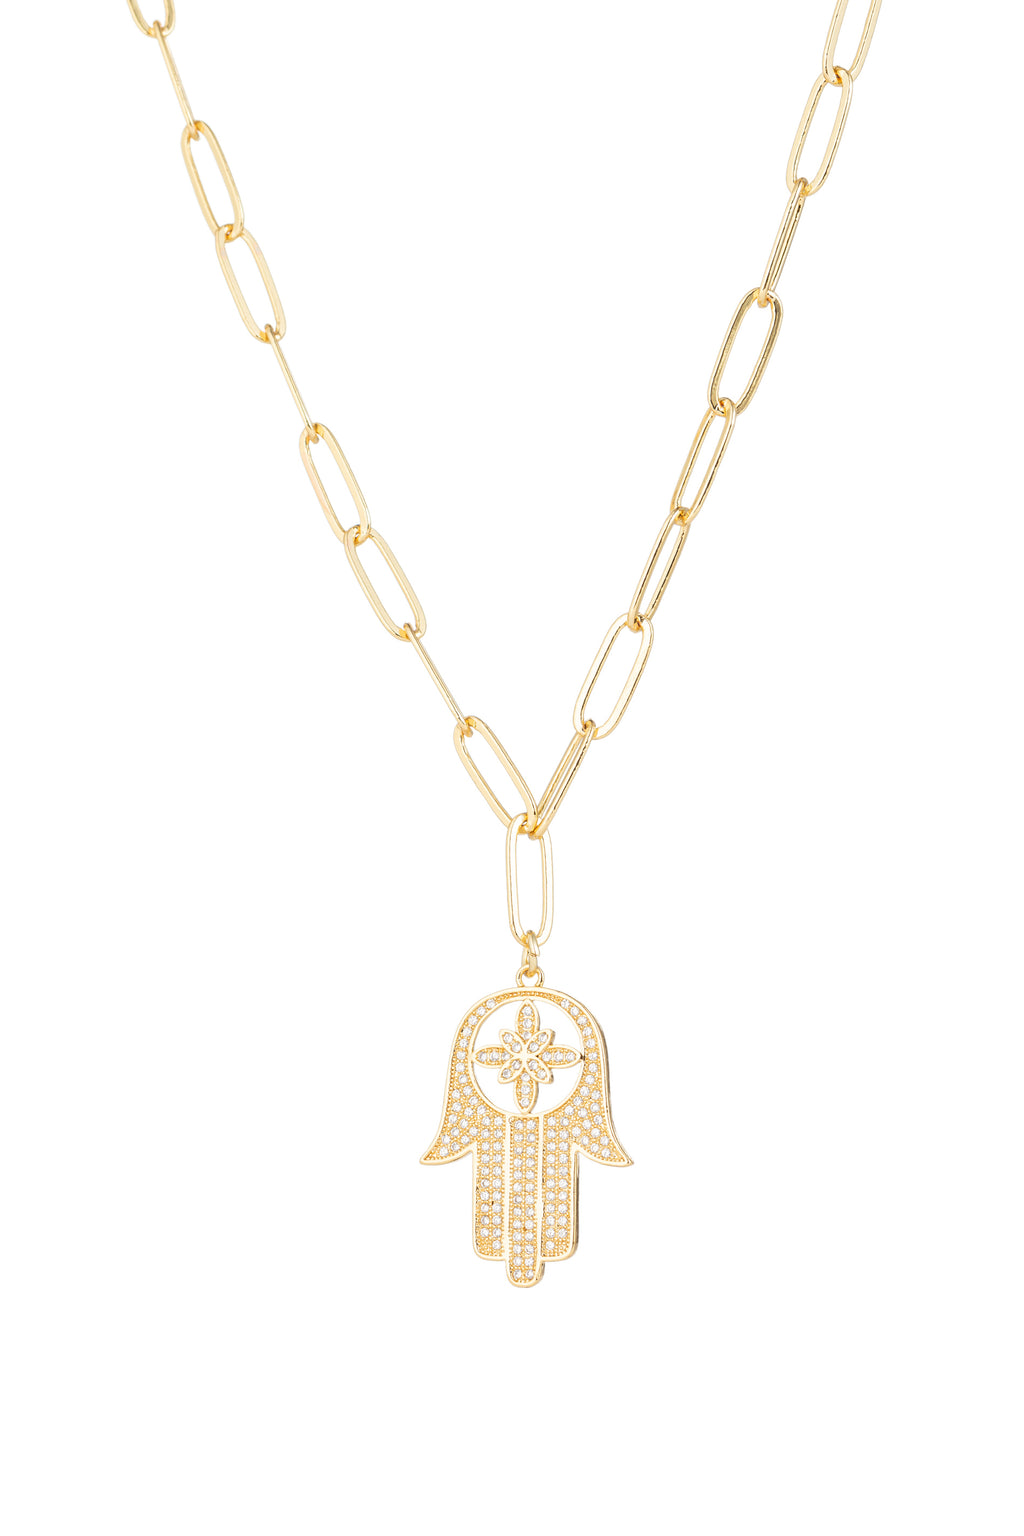 Gold Hamsa Hand chain link necklace with CZ crystals.